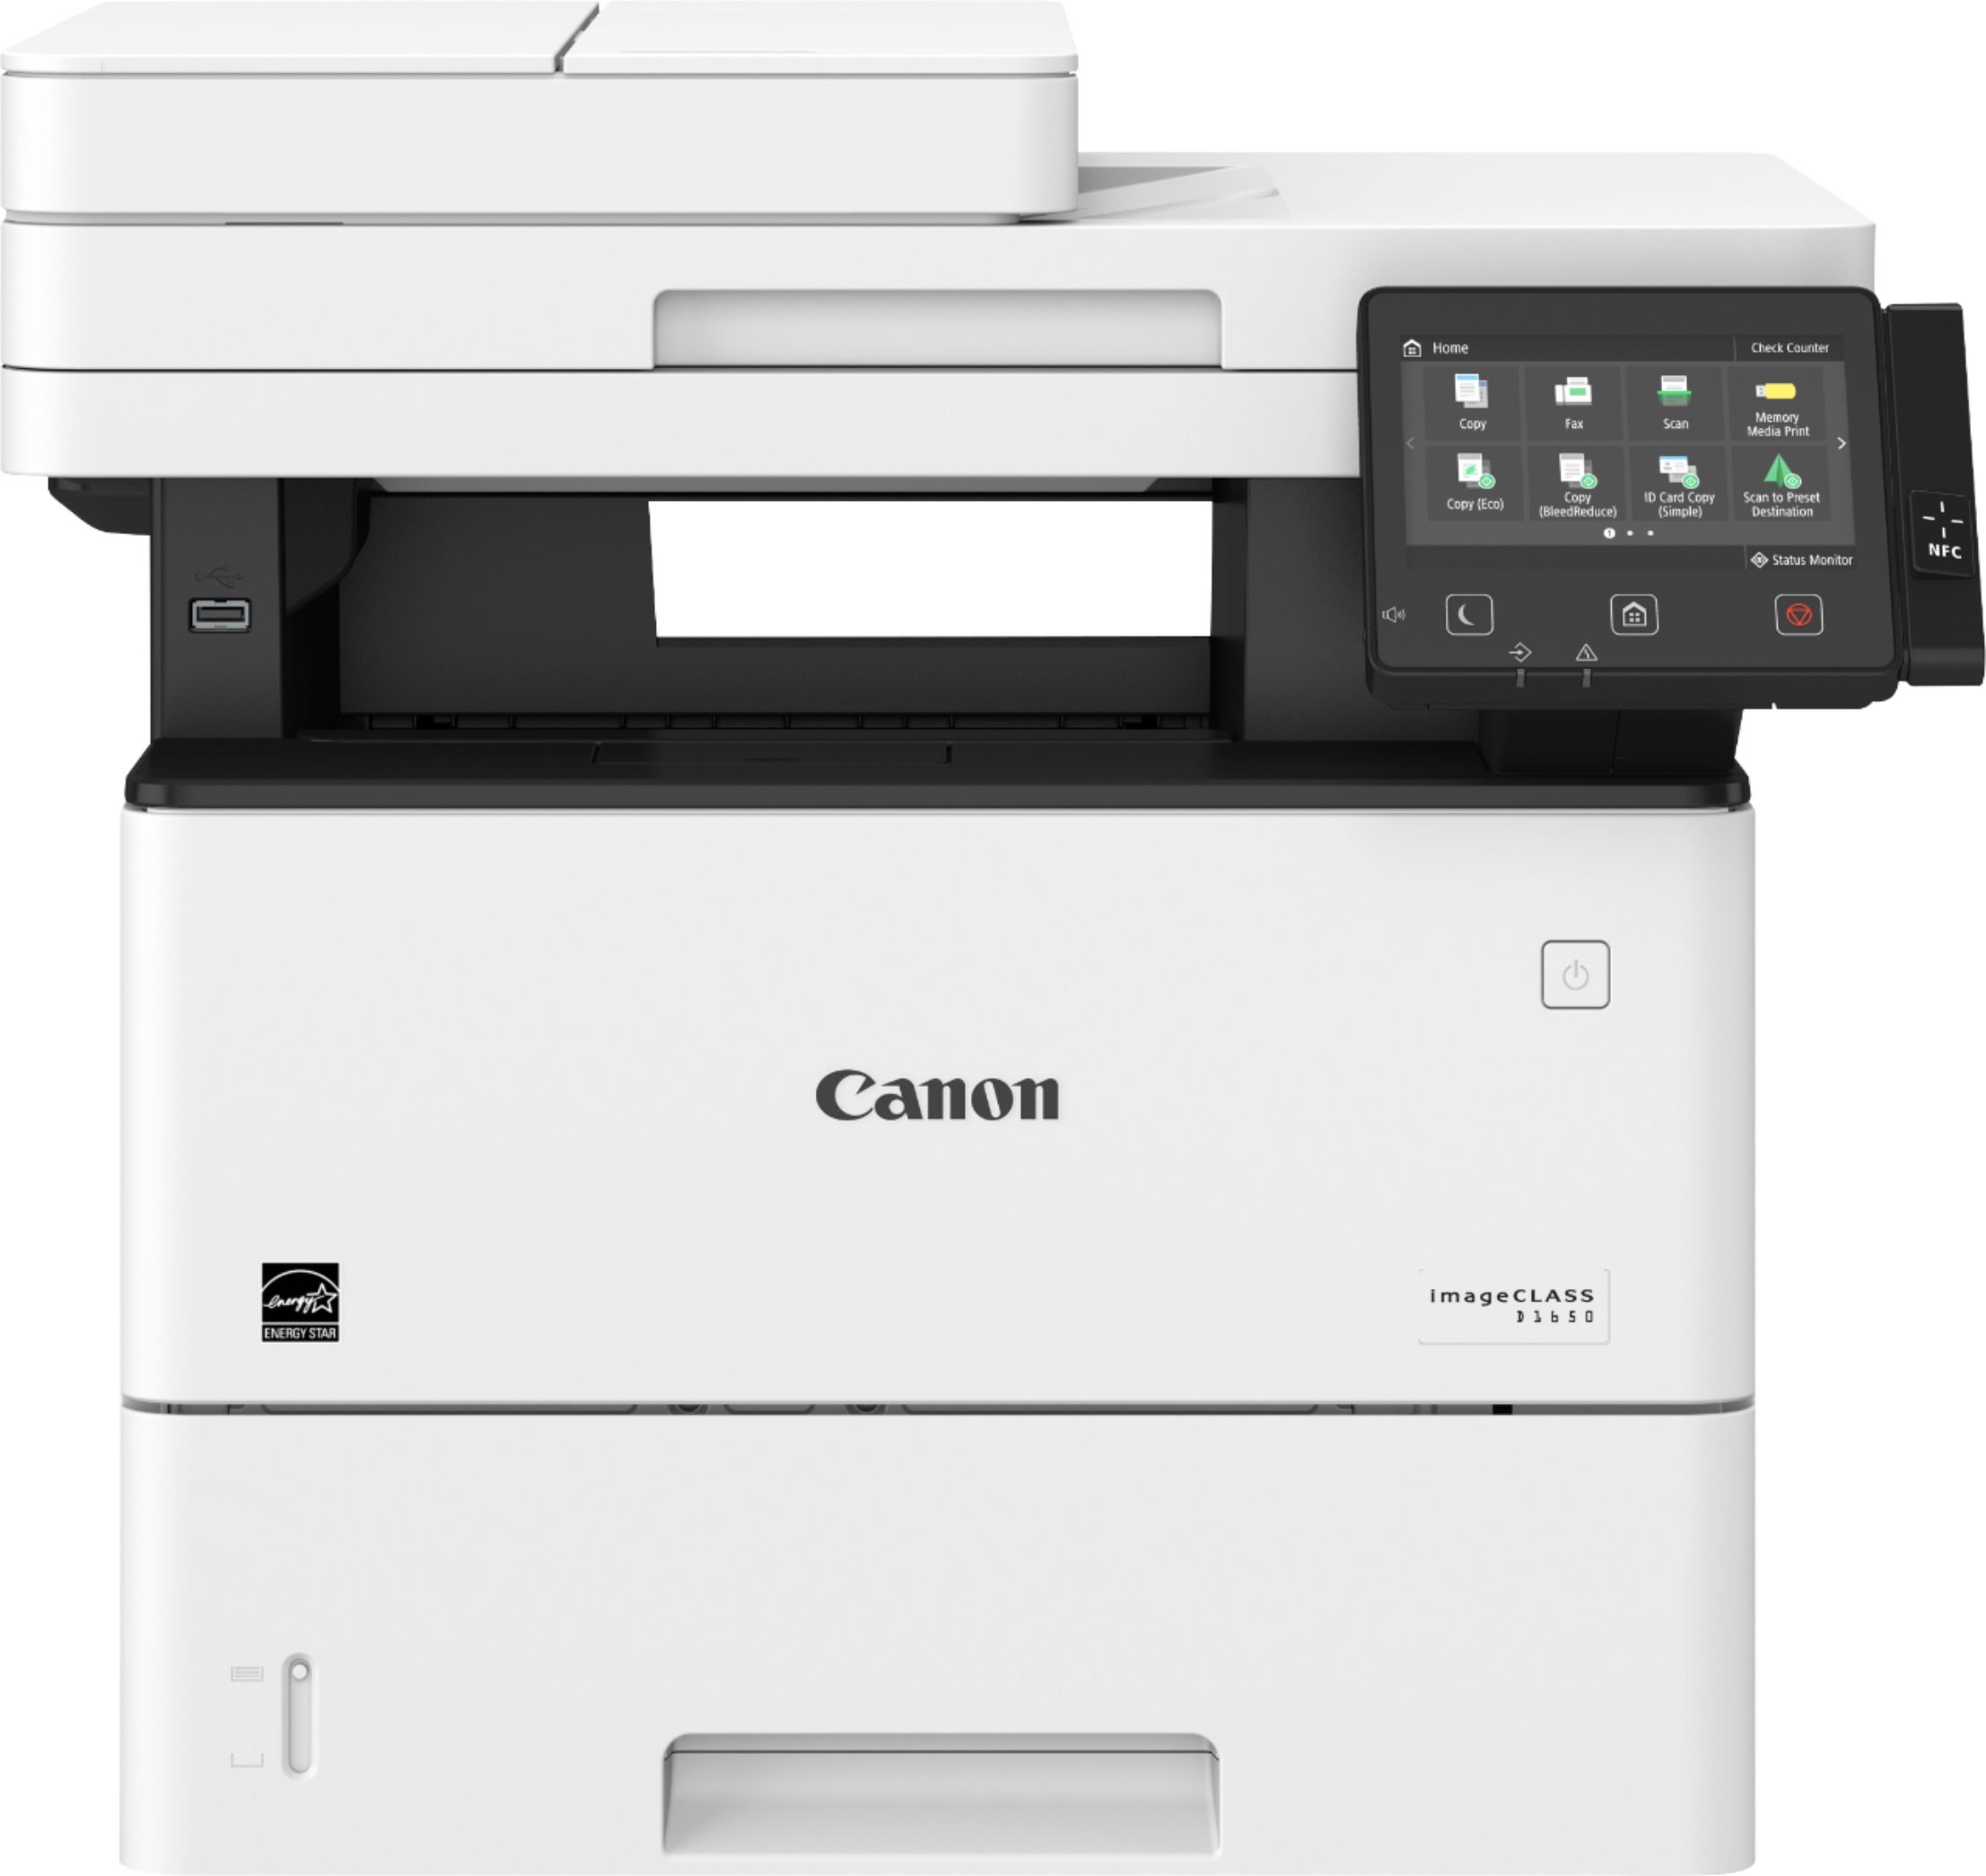 Canon imageCLASS D1650 Wireless Black-and-White All-In-One Laser